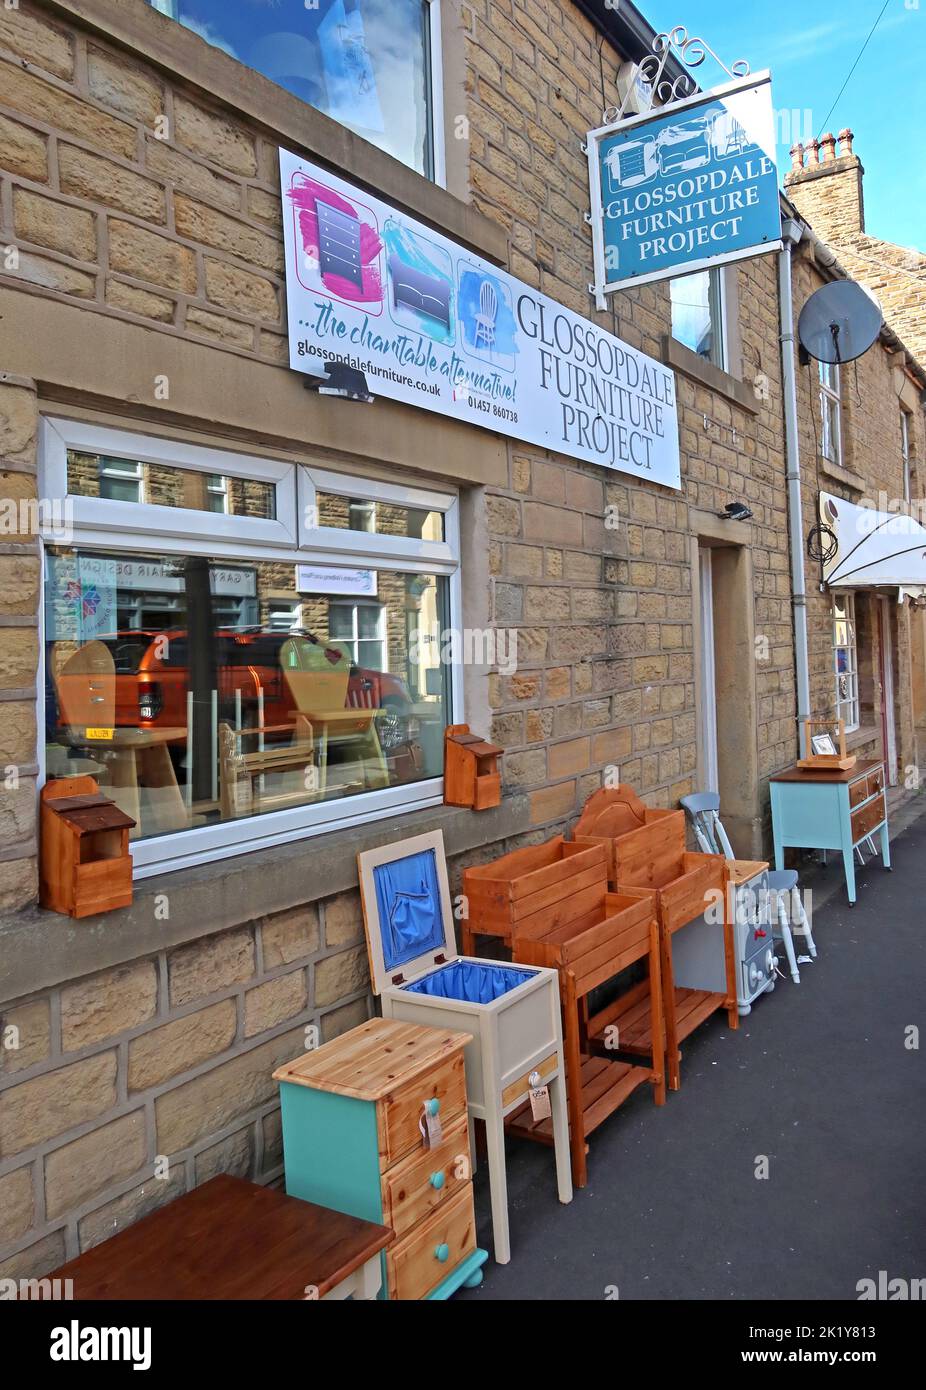 Glossopdale Furniture Project, George St, Glossop, High Peak, Derbys, ANGLETERRE, ROYAUME-UNI, SK13 8AY Banque D'Images